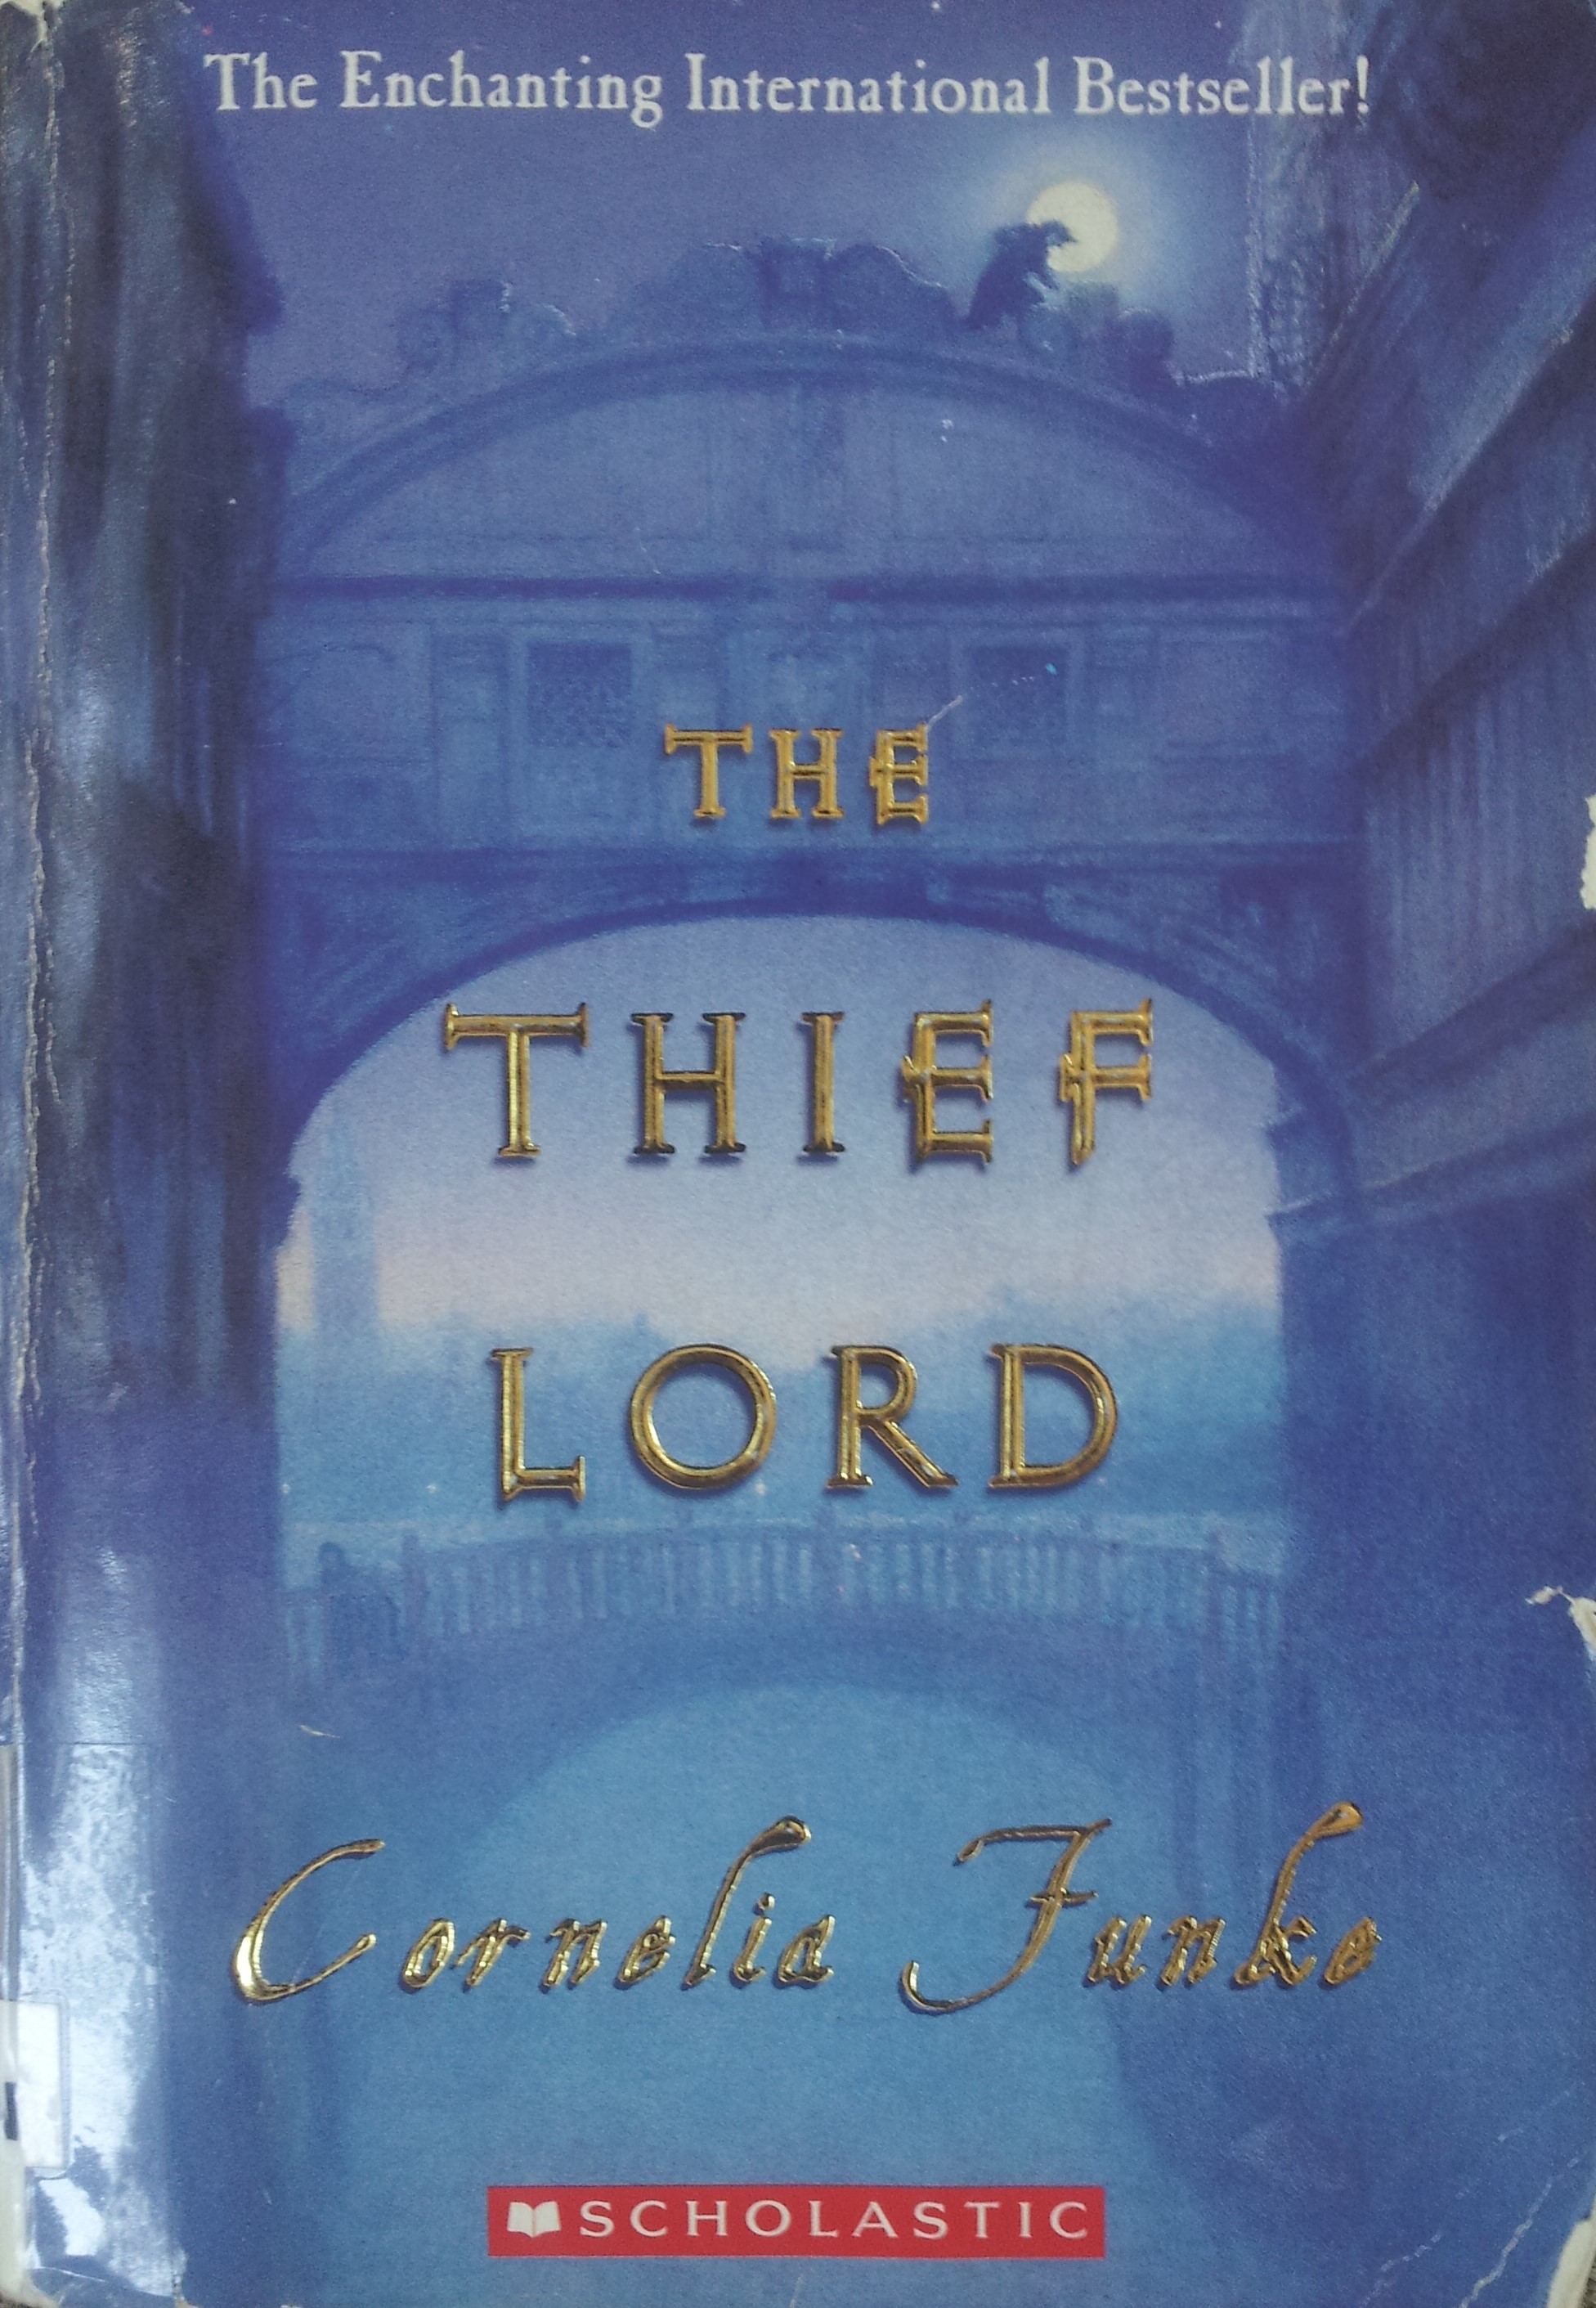 the thief lord book review